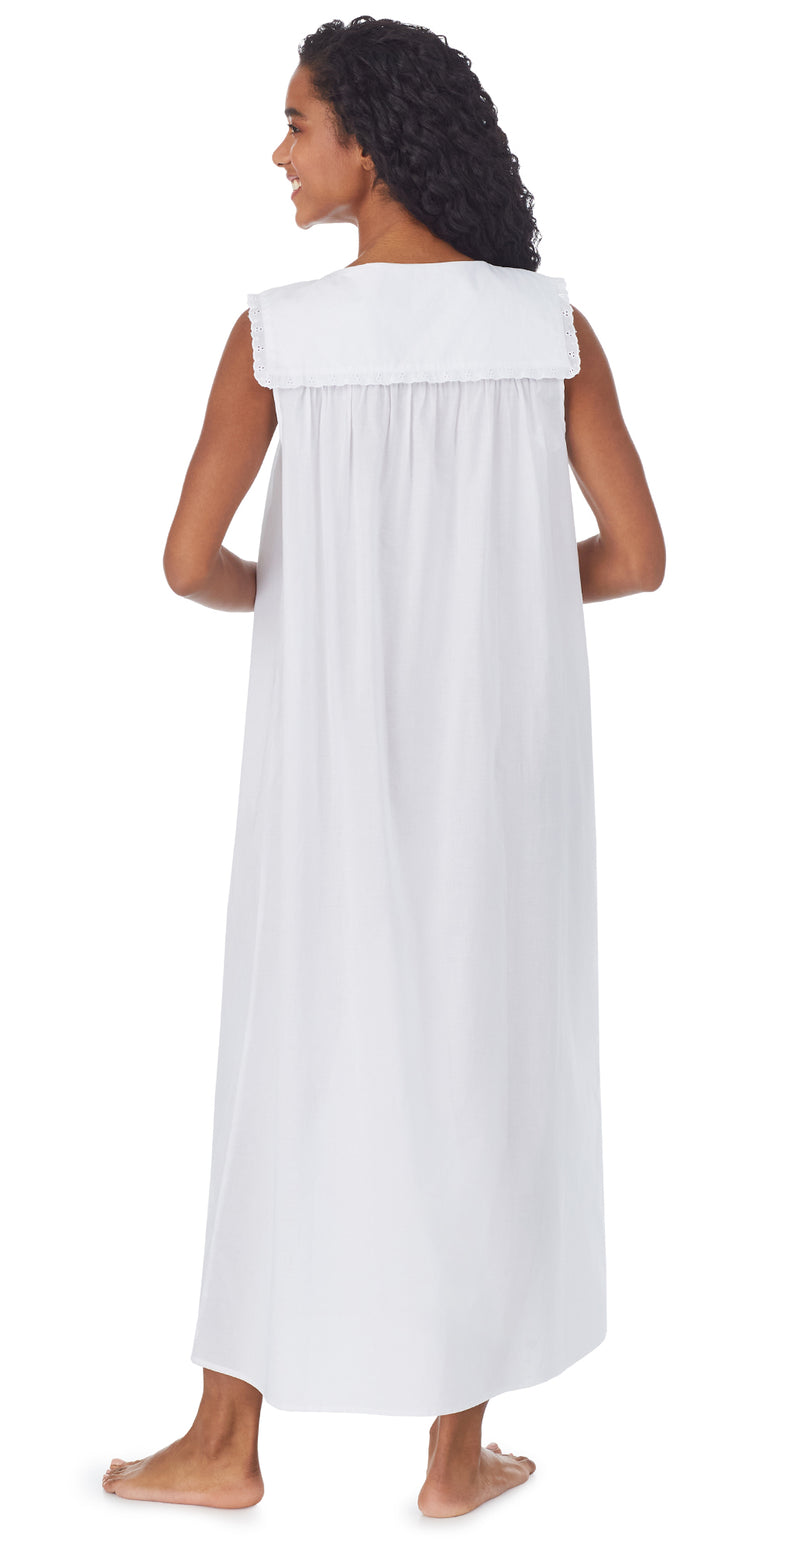 back of A lady wearing white long nightgown